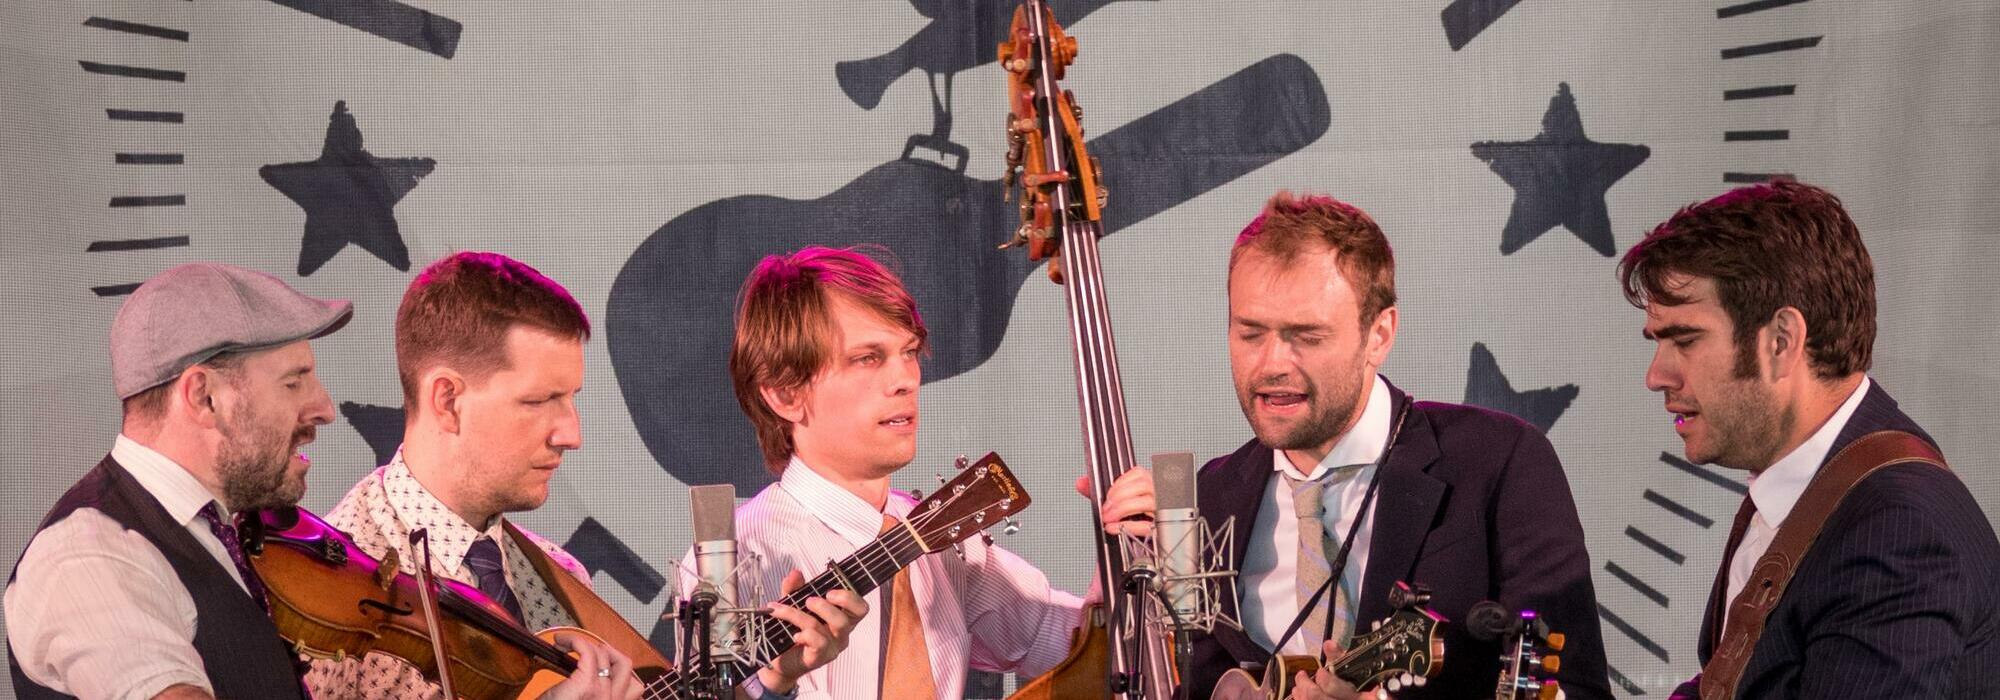 A Punch Brothers live event